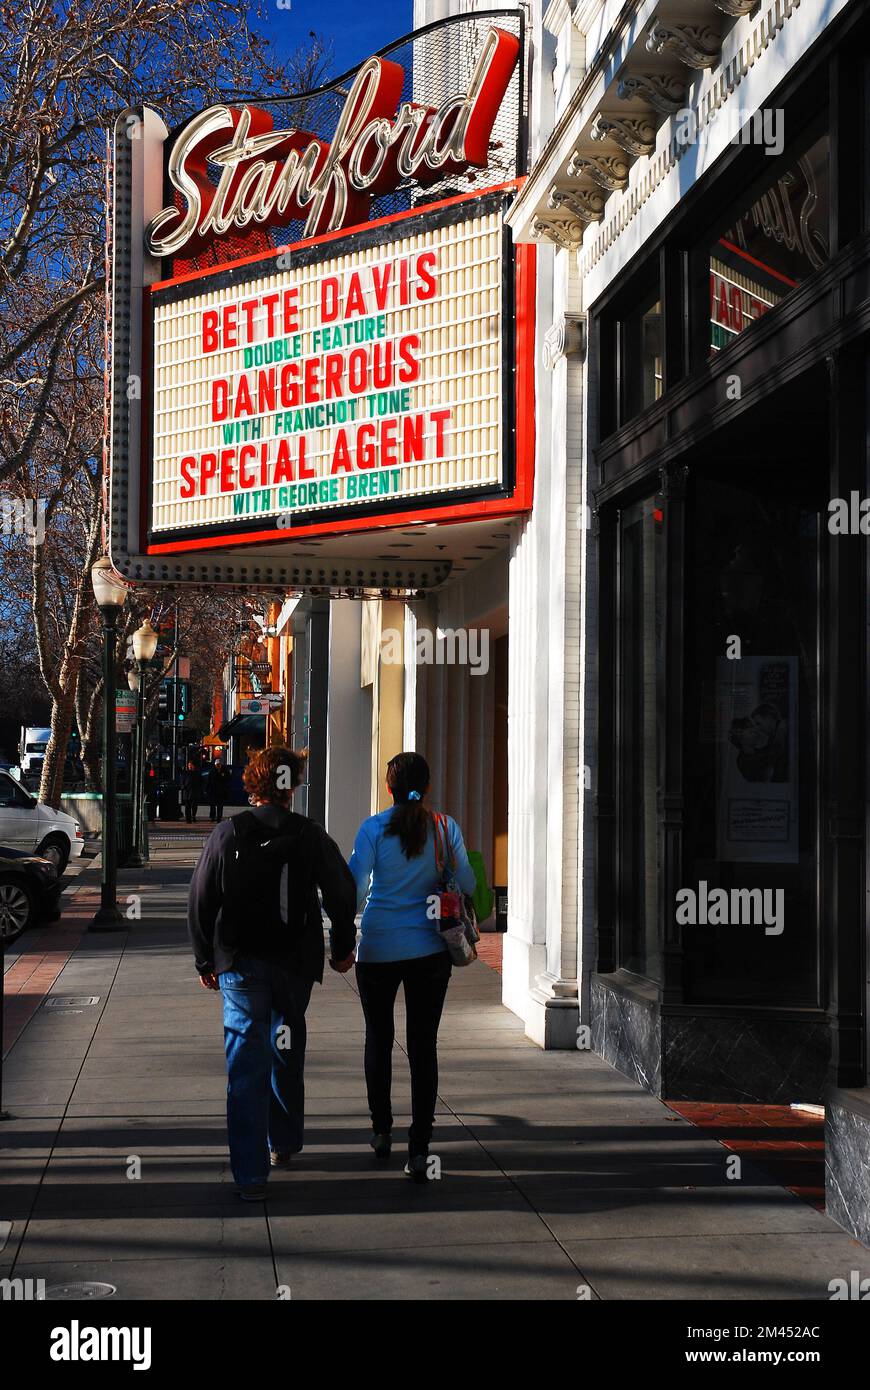 A couple walks under the marquee for the Stanford Theater in downtown Palo Alto, California.  The Theater is known to play classic Hollywood films Stock Photo